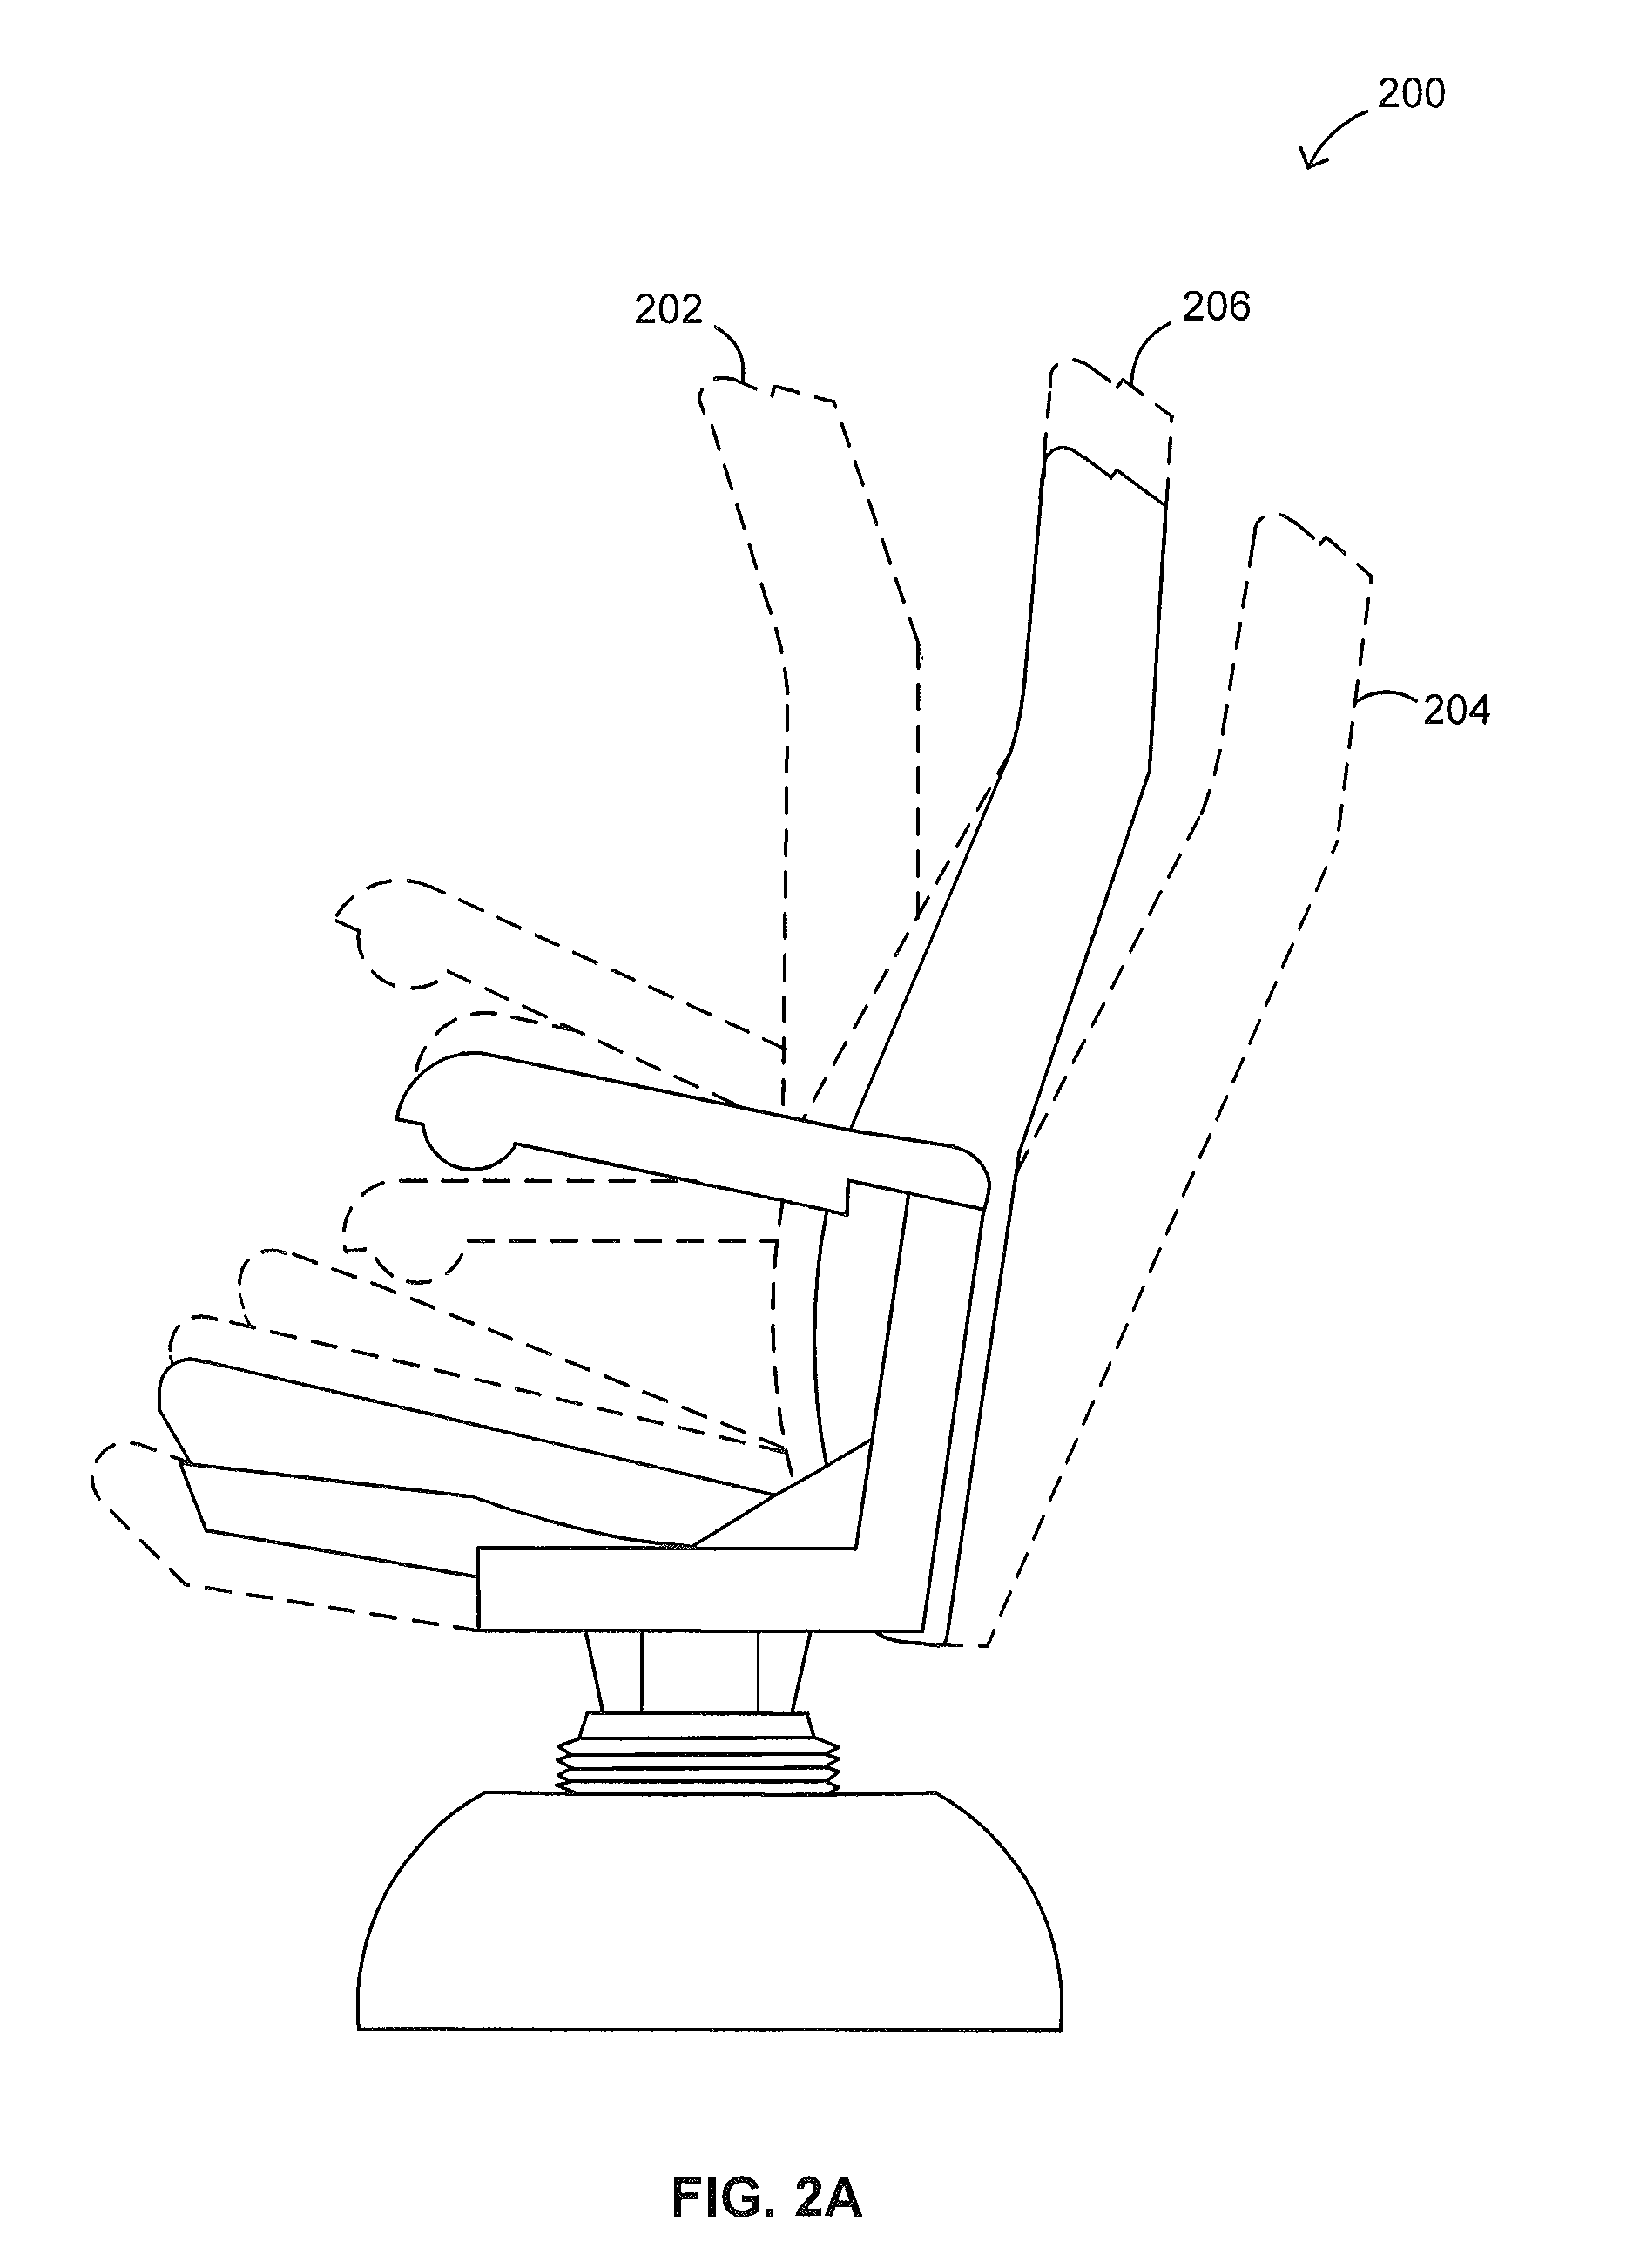 System, device and method for controlling effects in a theatre